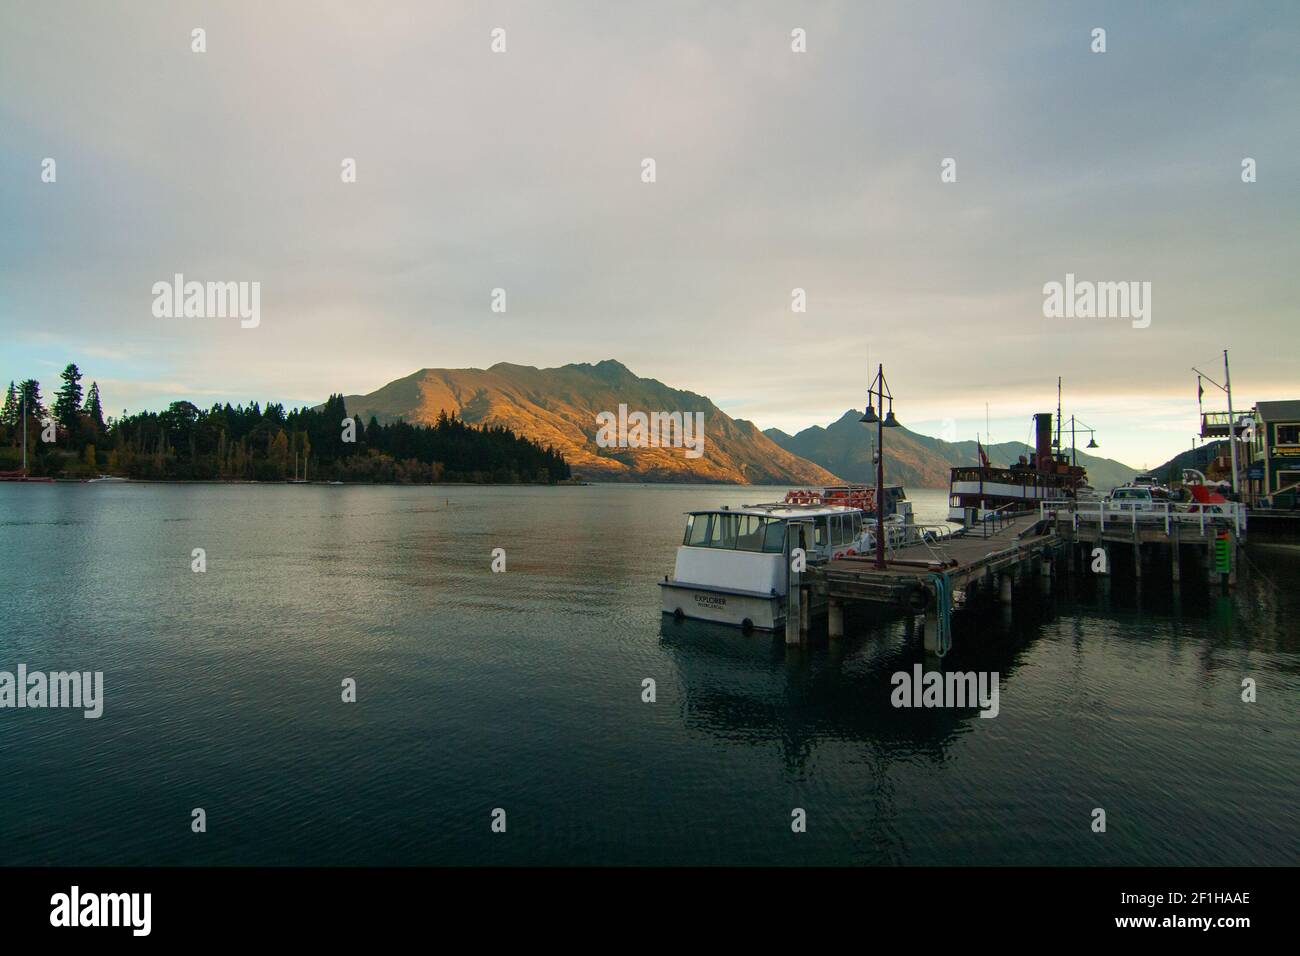 Queenstown Wharf and Harbour View of Lake Wakatipu and Mountain Peaks at Sunset Lights on the background, New Zealand, South Island Banque D'Images